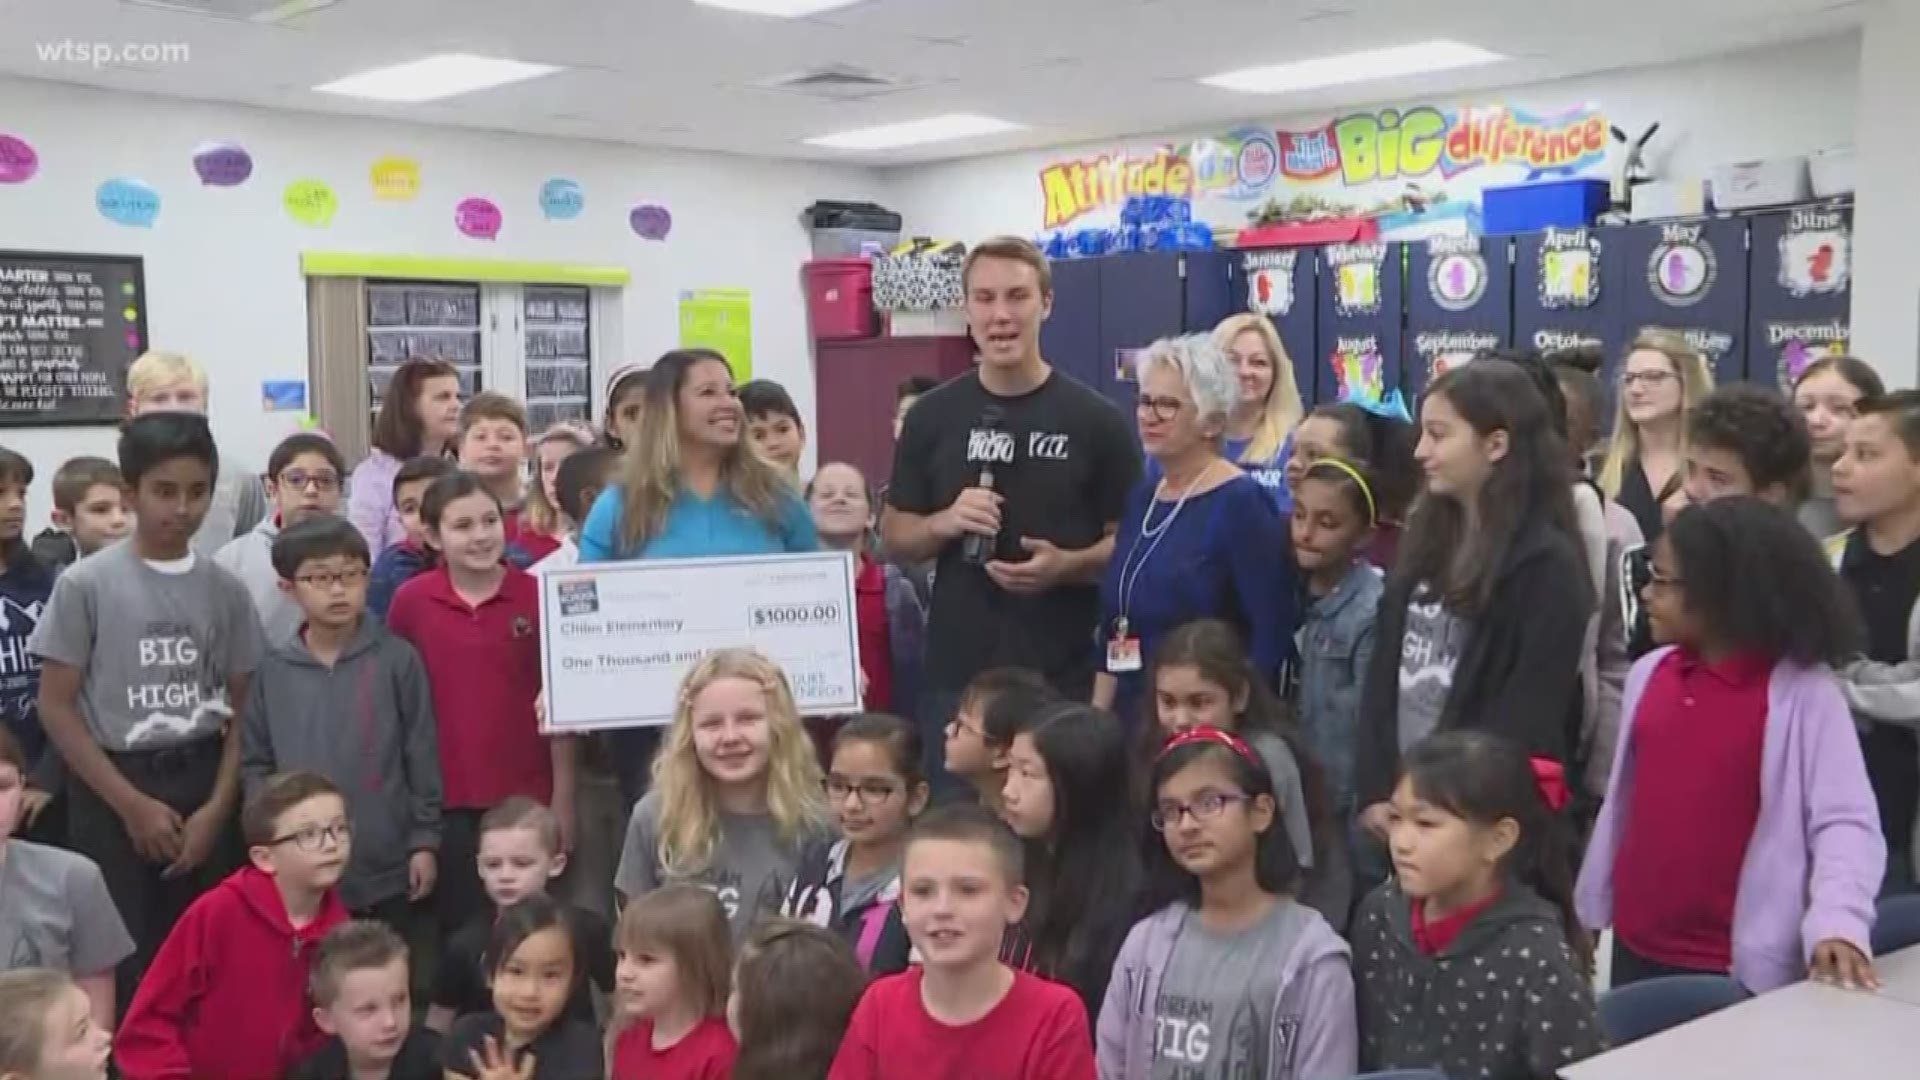 Duke Energy Florida presented a $1,000 check to Chiles Elementary.